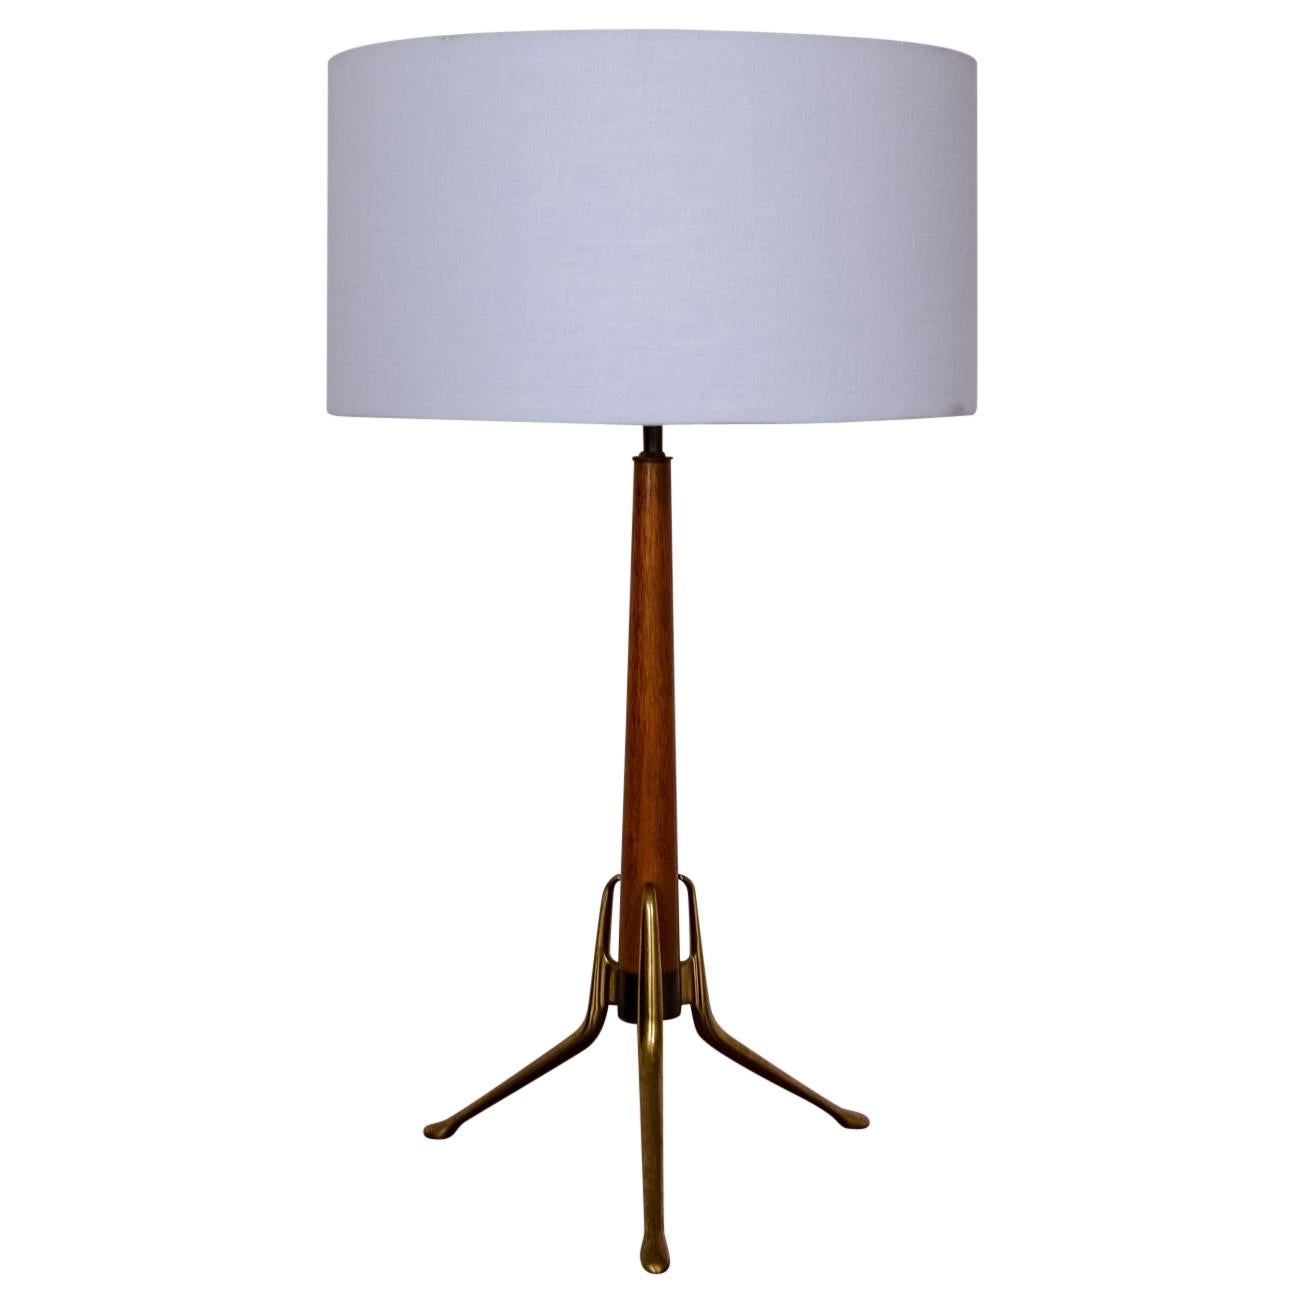 Brass and Walnut Tripod Table Lamp by Gerald Thurston for Lightolier